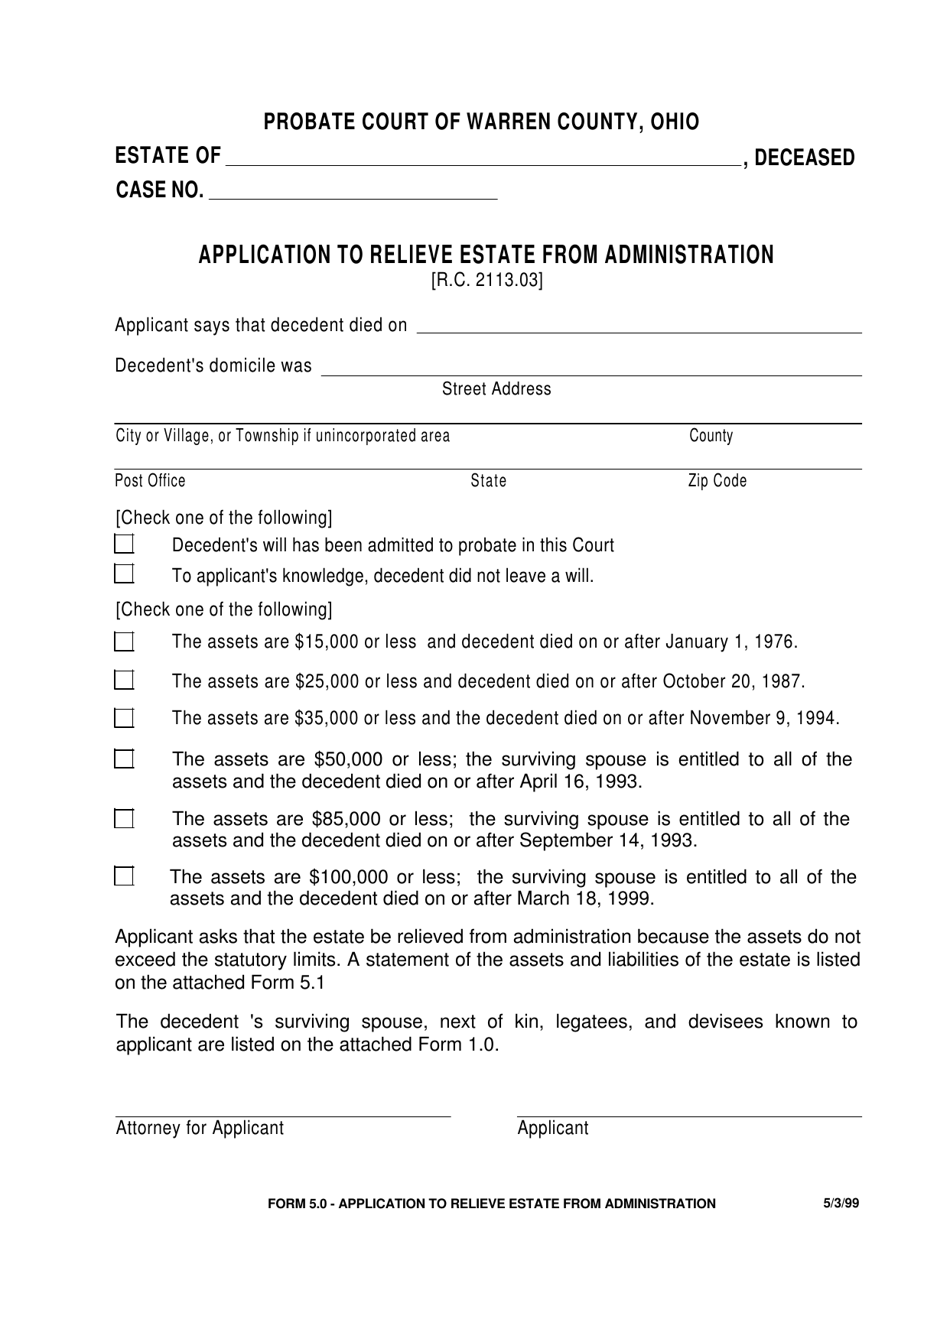 Form 5.0 Application to Relieve Estate From Administration - Warren County, Ohio, Page 1